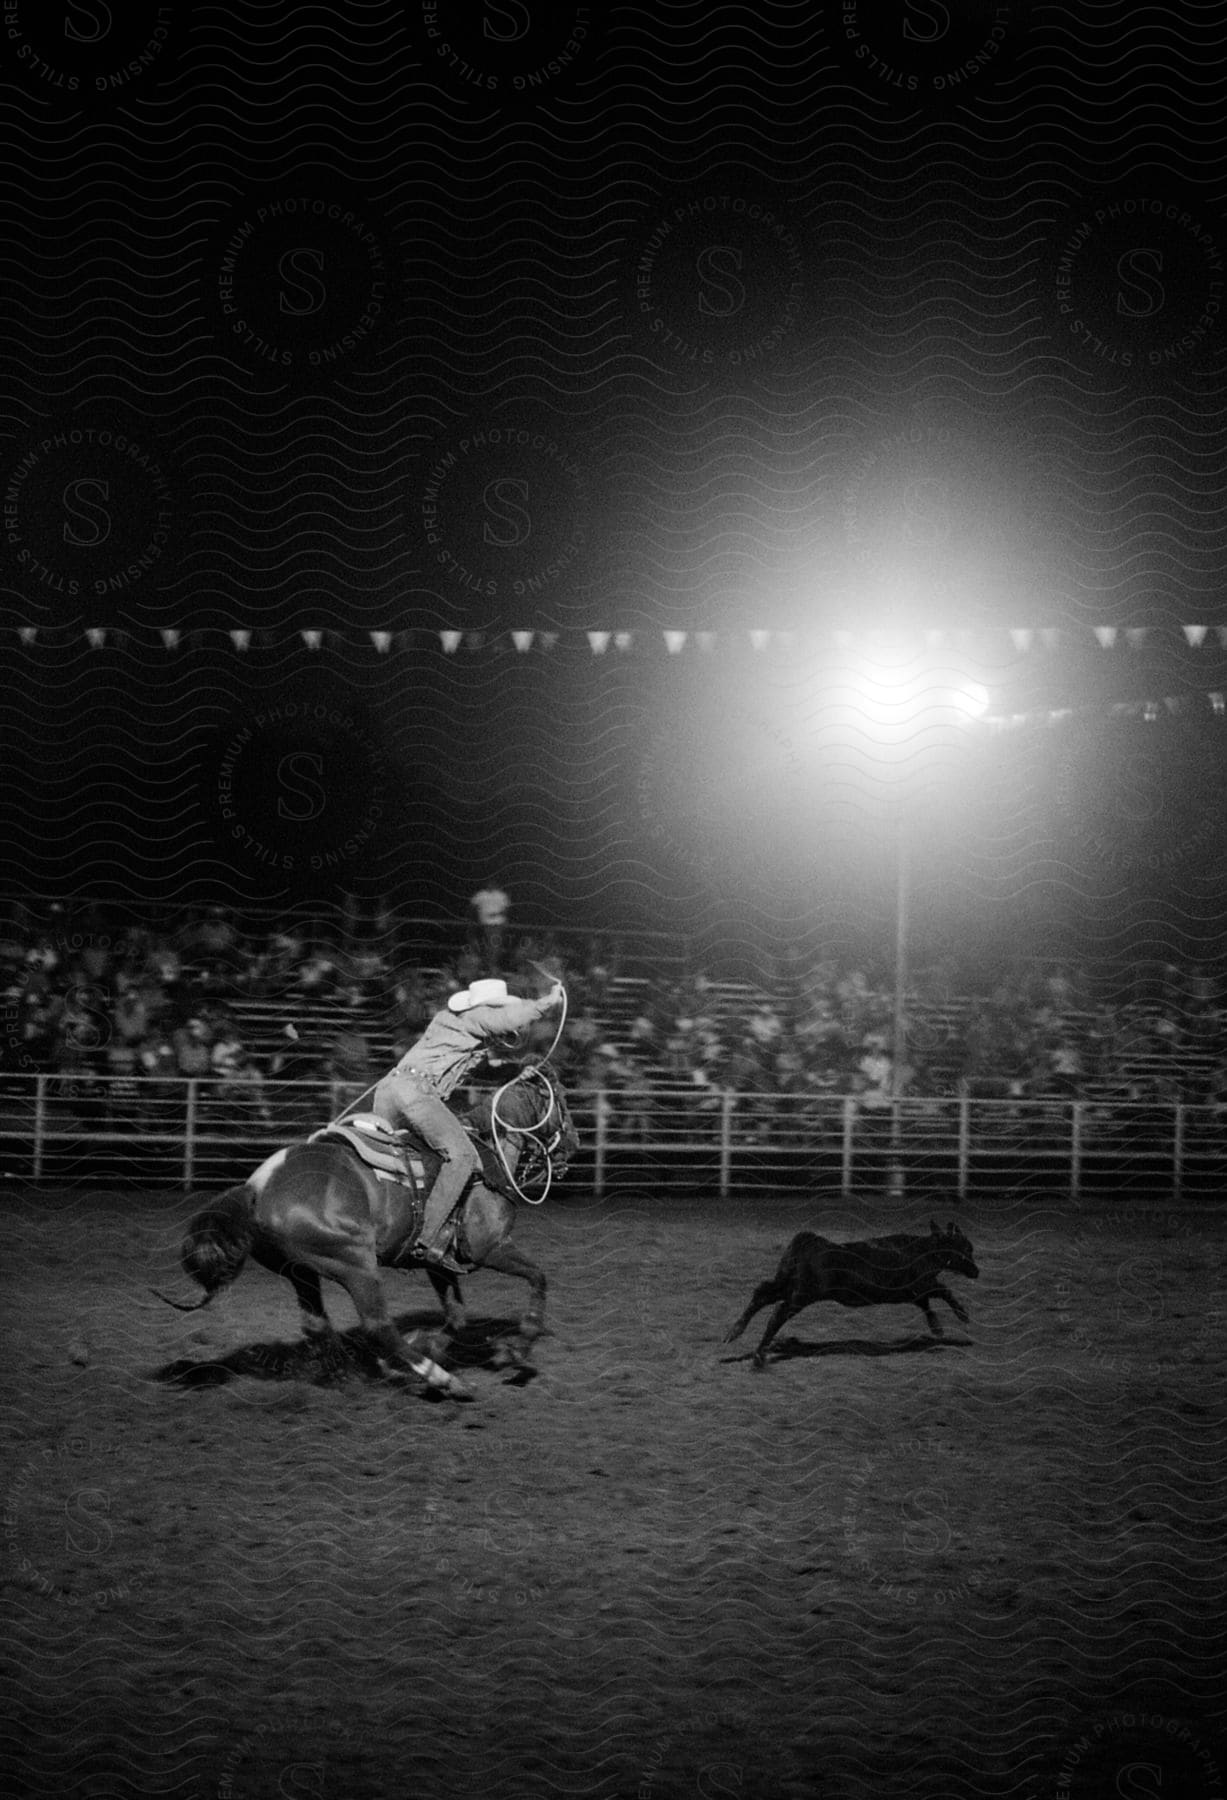 A determined person takes a risky adventure in a rodeo surrounded by a crowd and powerful animals